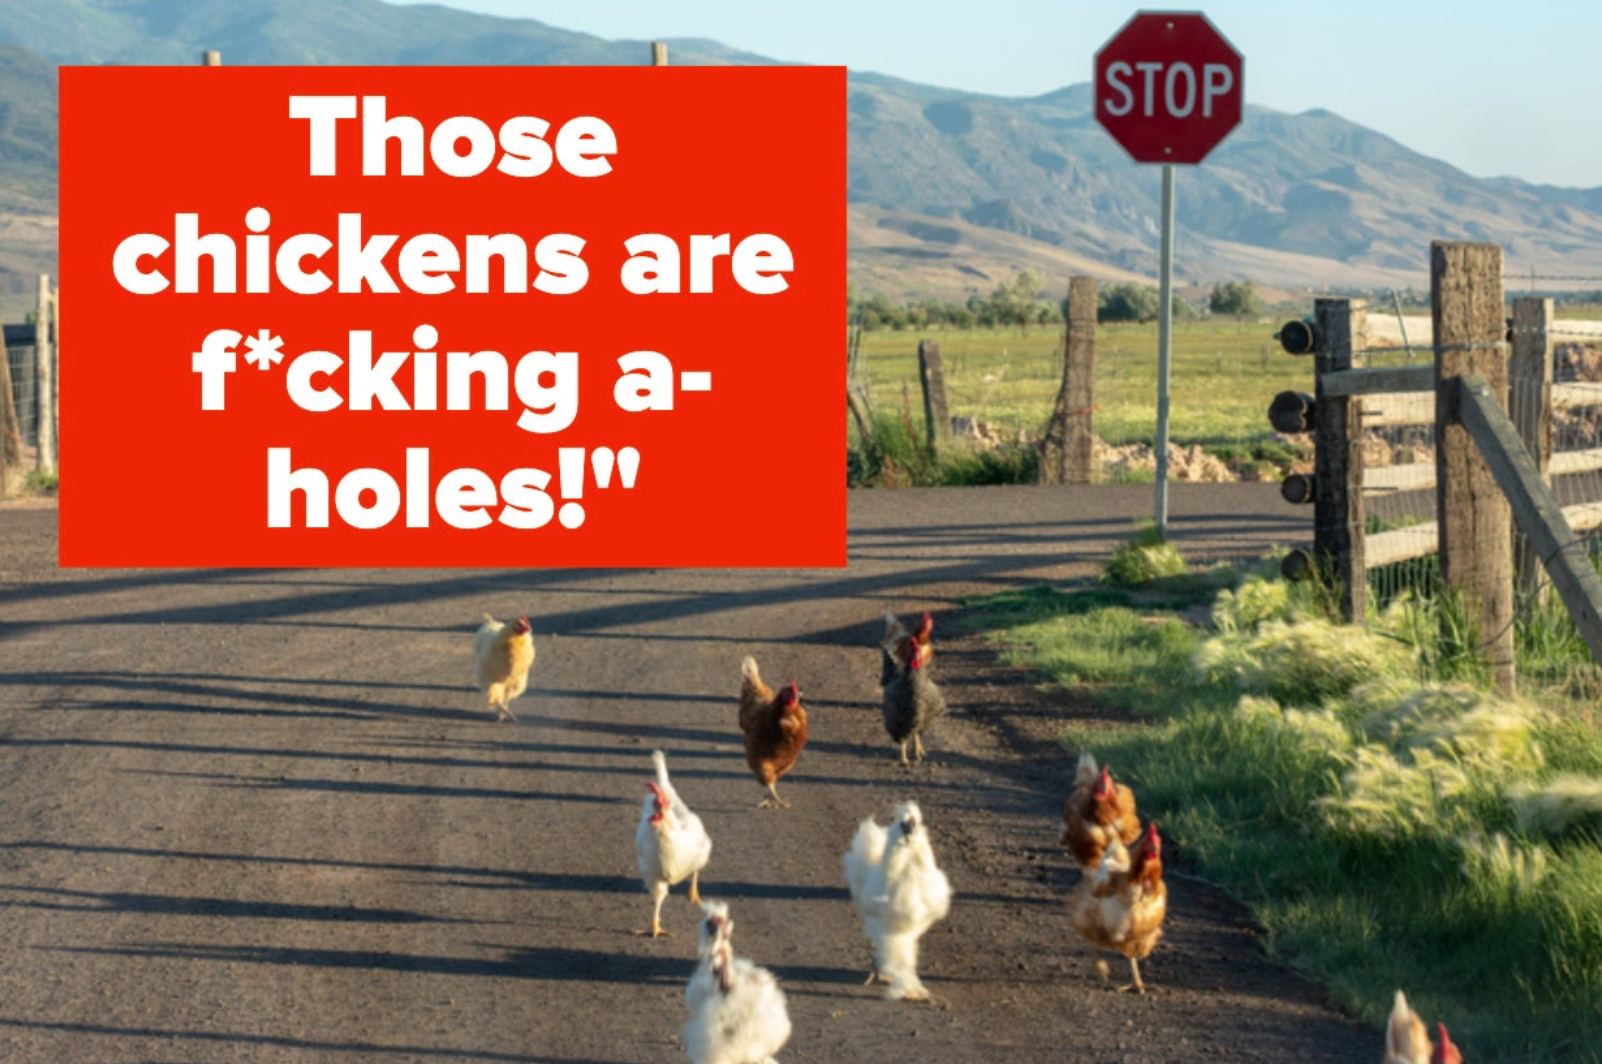 getty image of chicken in the road